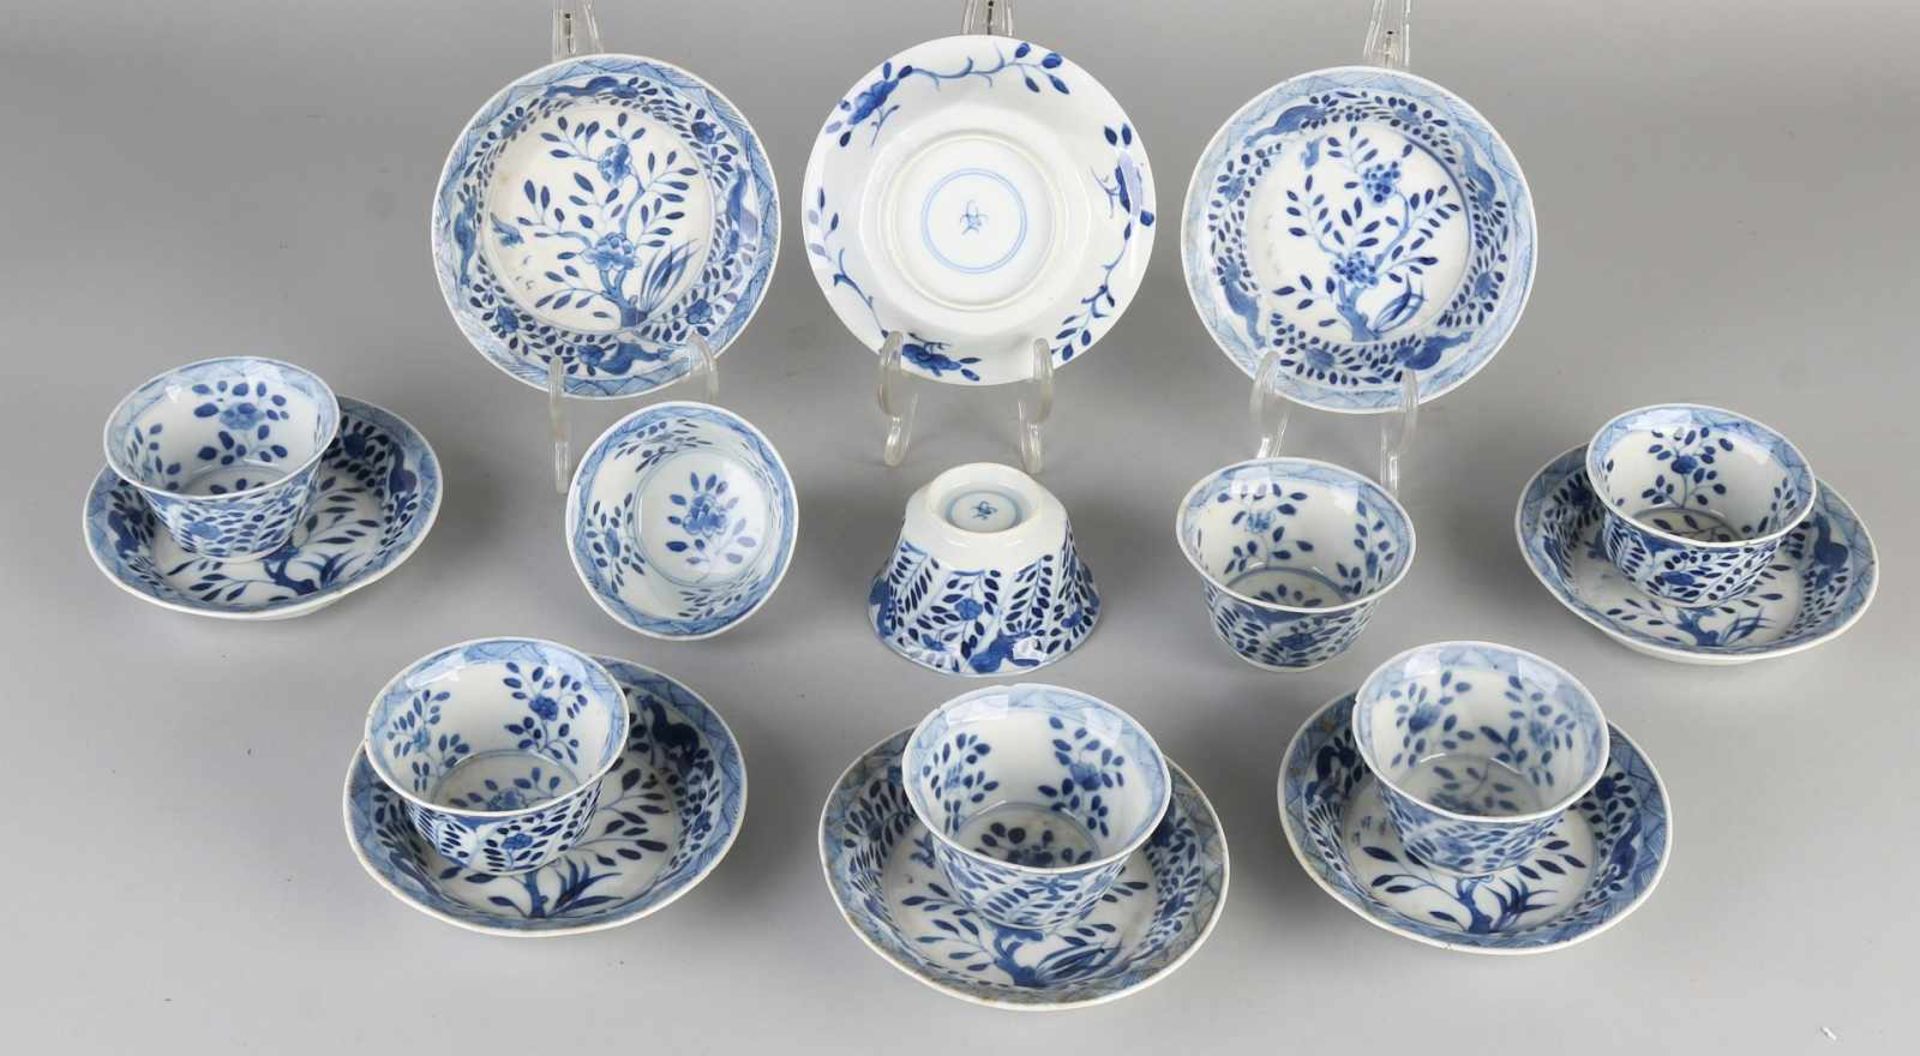 Eight Chinese porcelain Kangxi branded cups and saucers with chicken / parsley decor. Five dishes